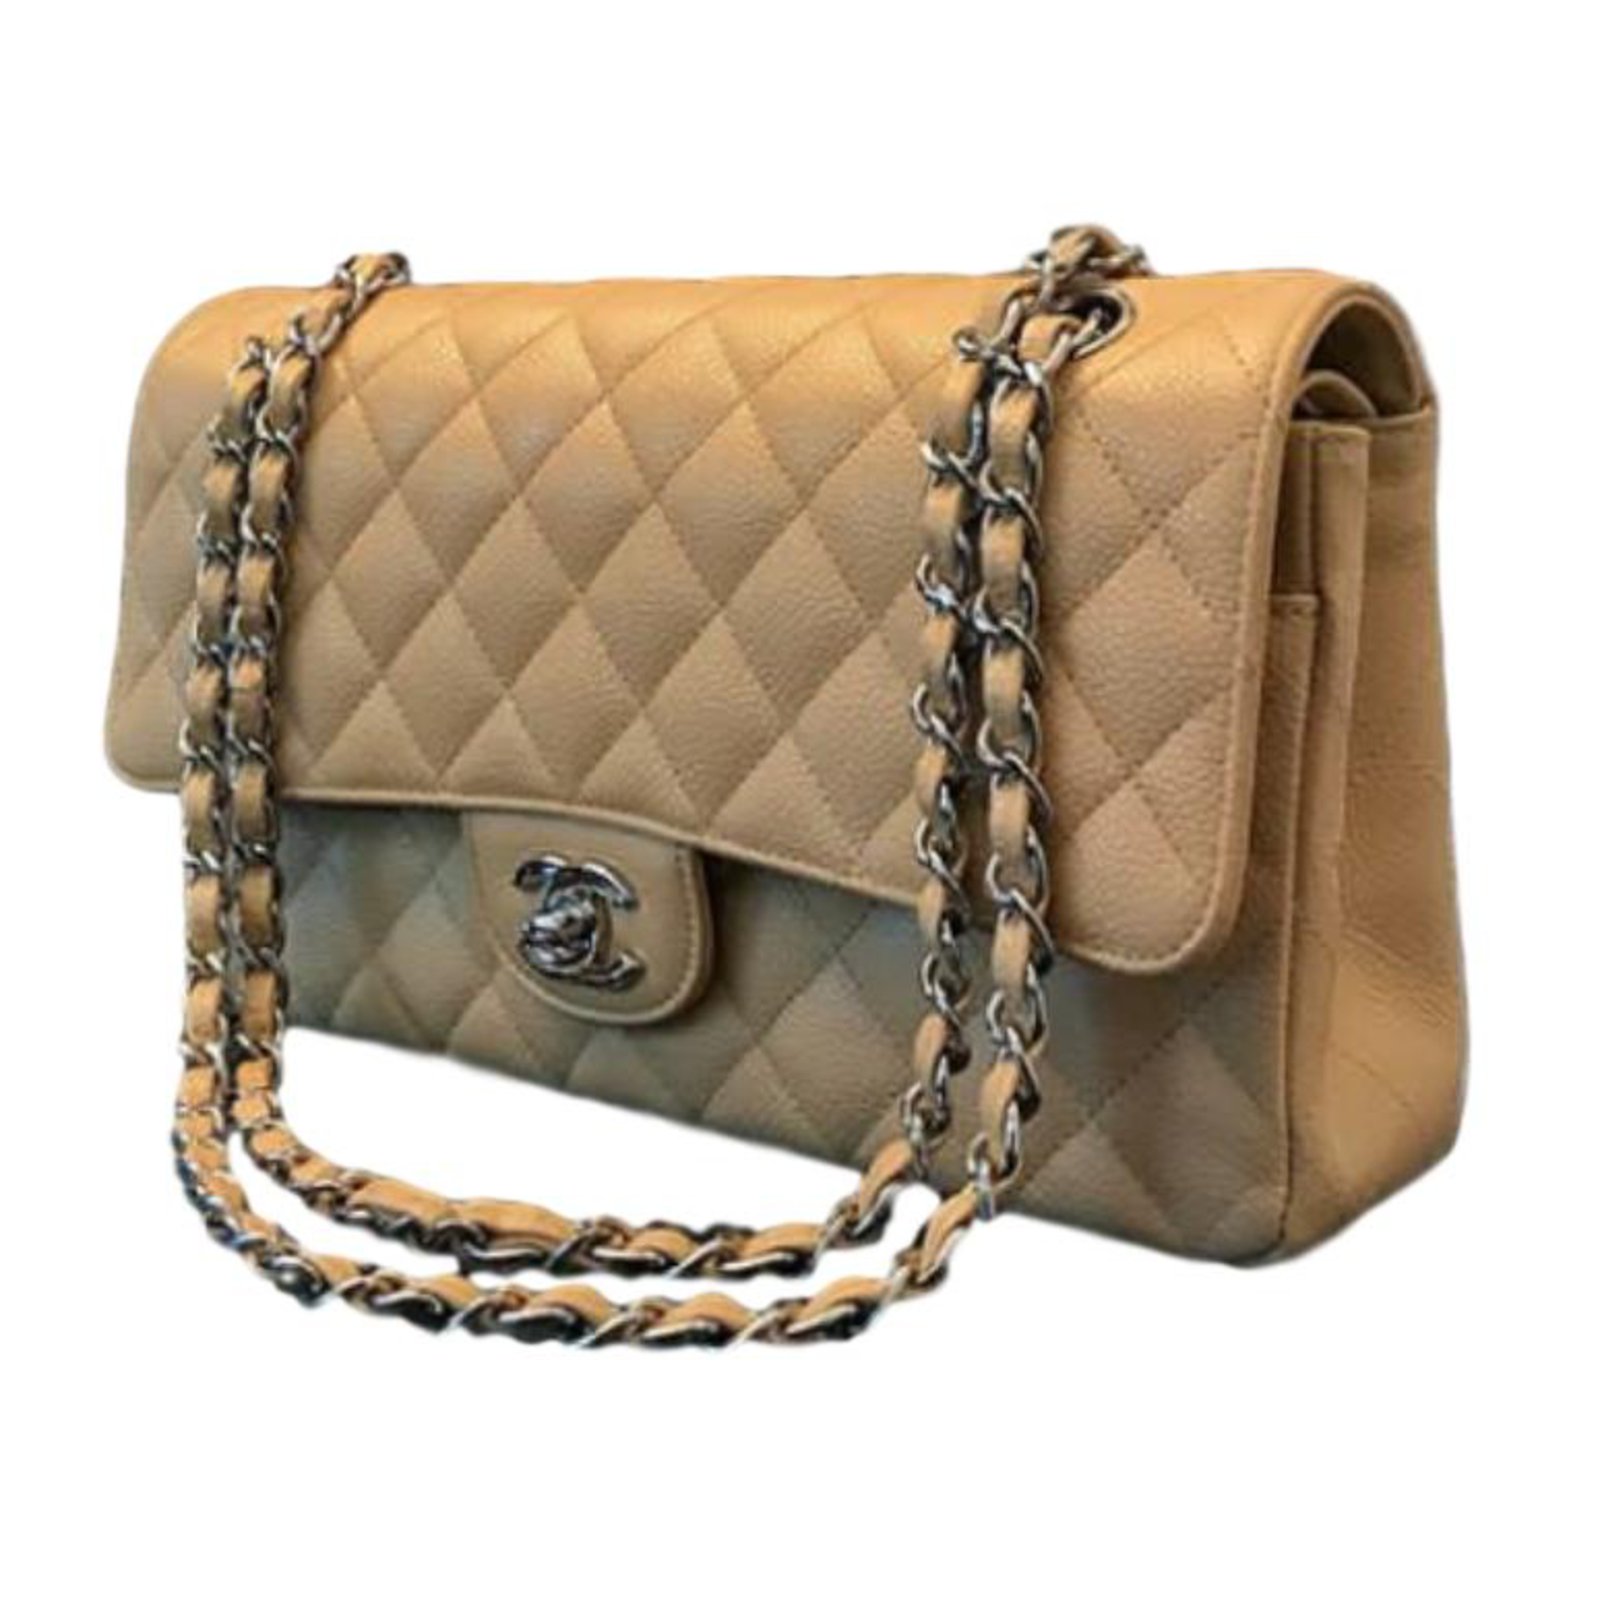 Beige Chanel Bags  Beige Chanel Purse for Sale  Madison Avenue Couture